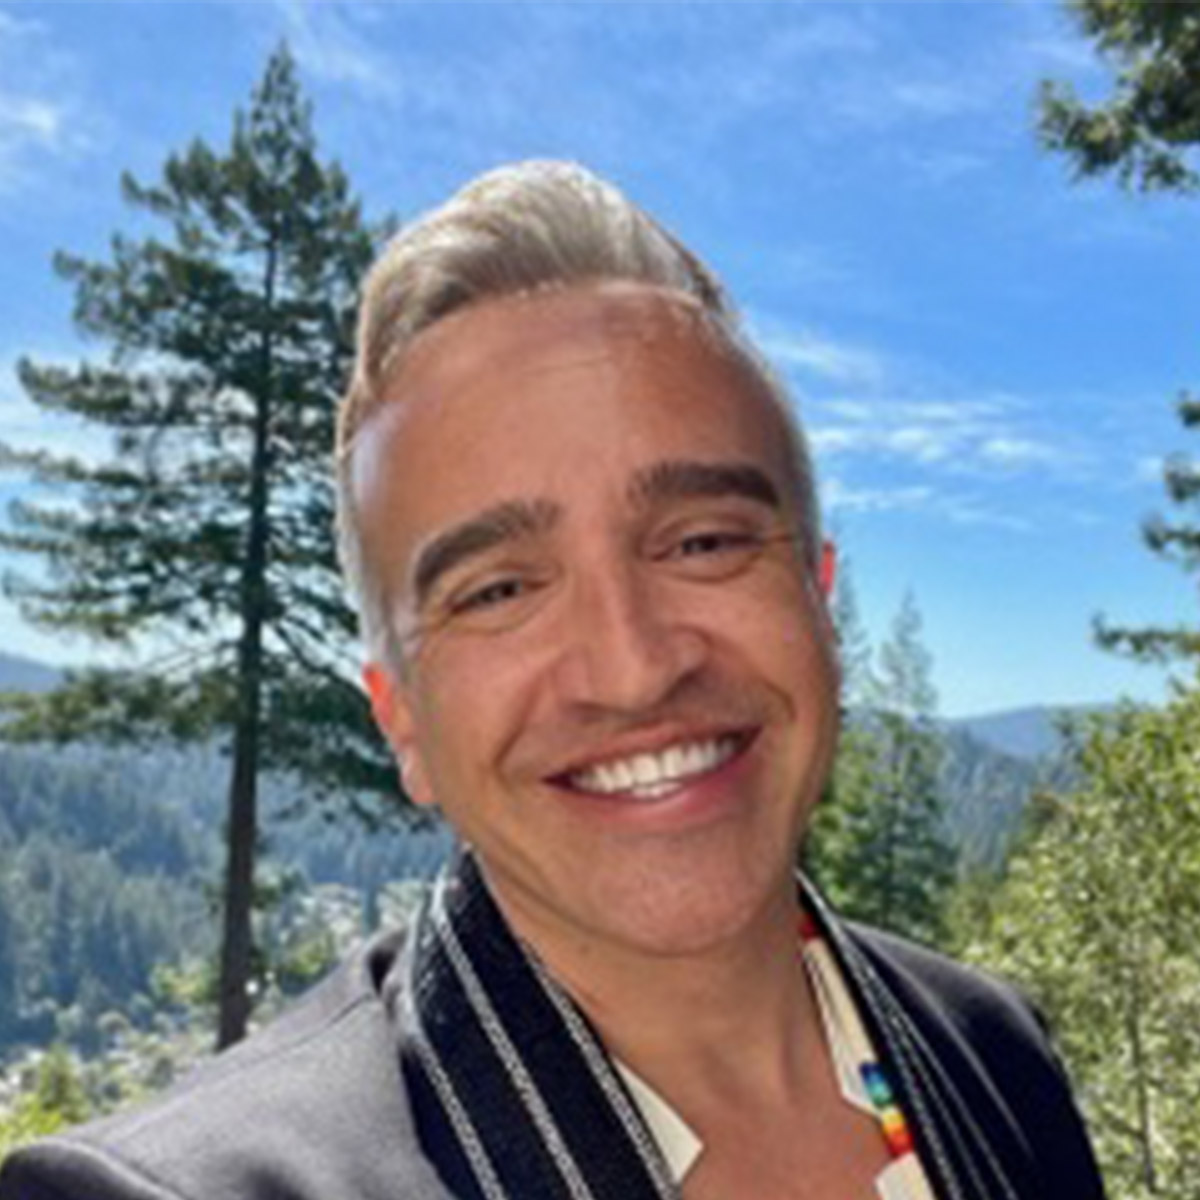 Roger Kuhn color portrait. Roger is a Poarch Creek Two-Spirit Indigequeer and is posed outside among pine trees and a blue sky. Roger is smiling, wears a dark-colored blazer.